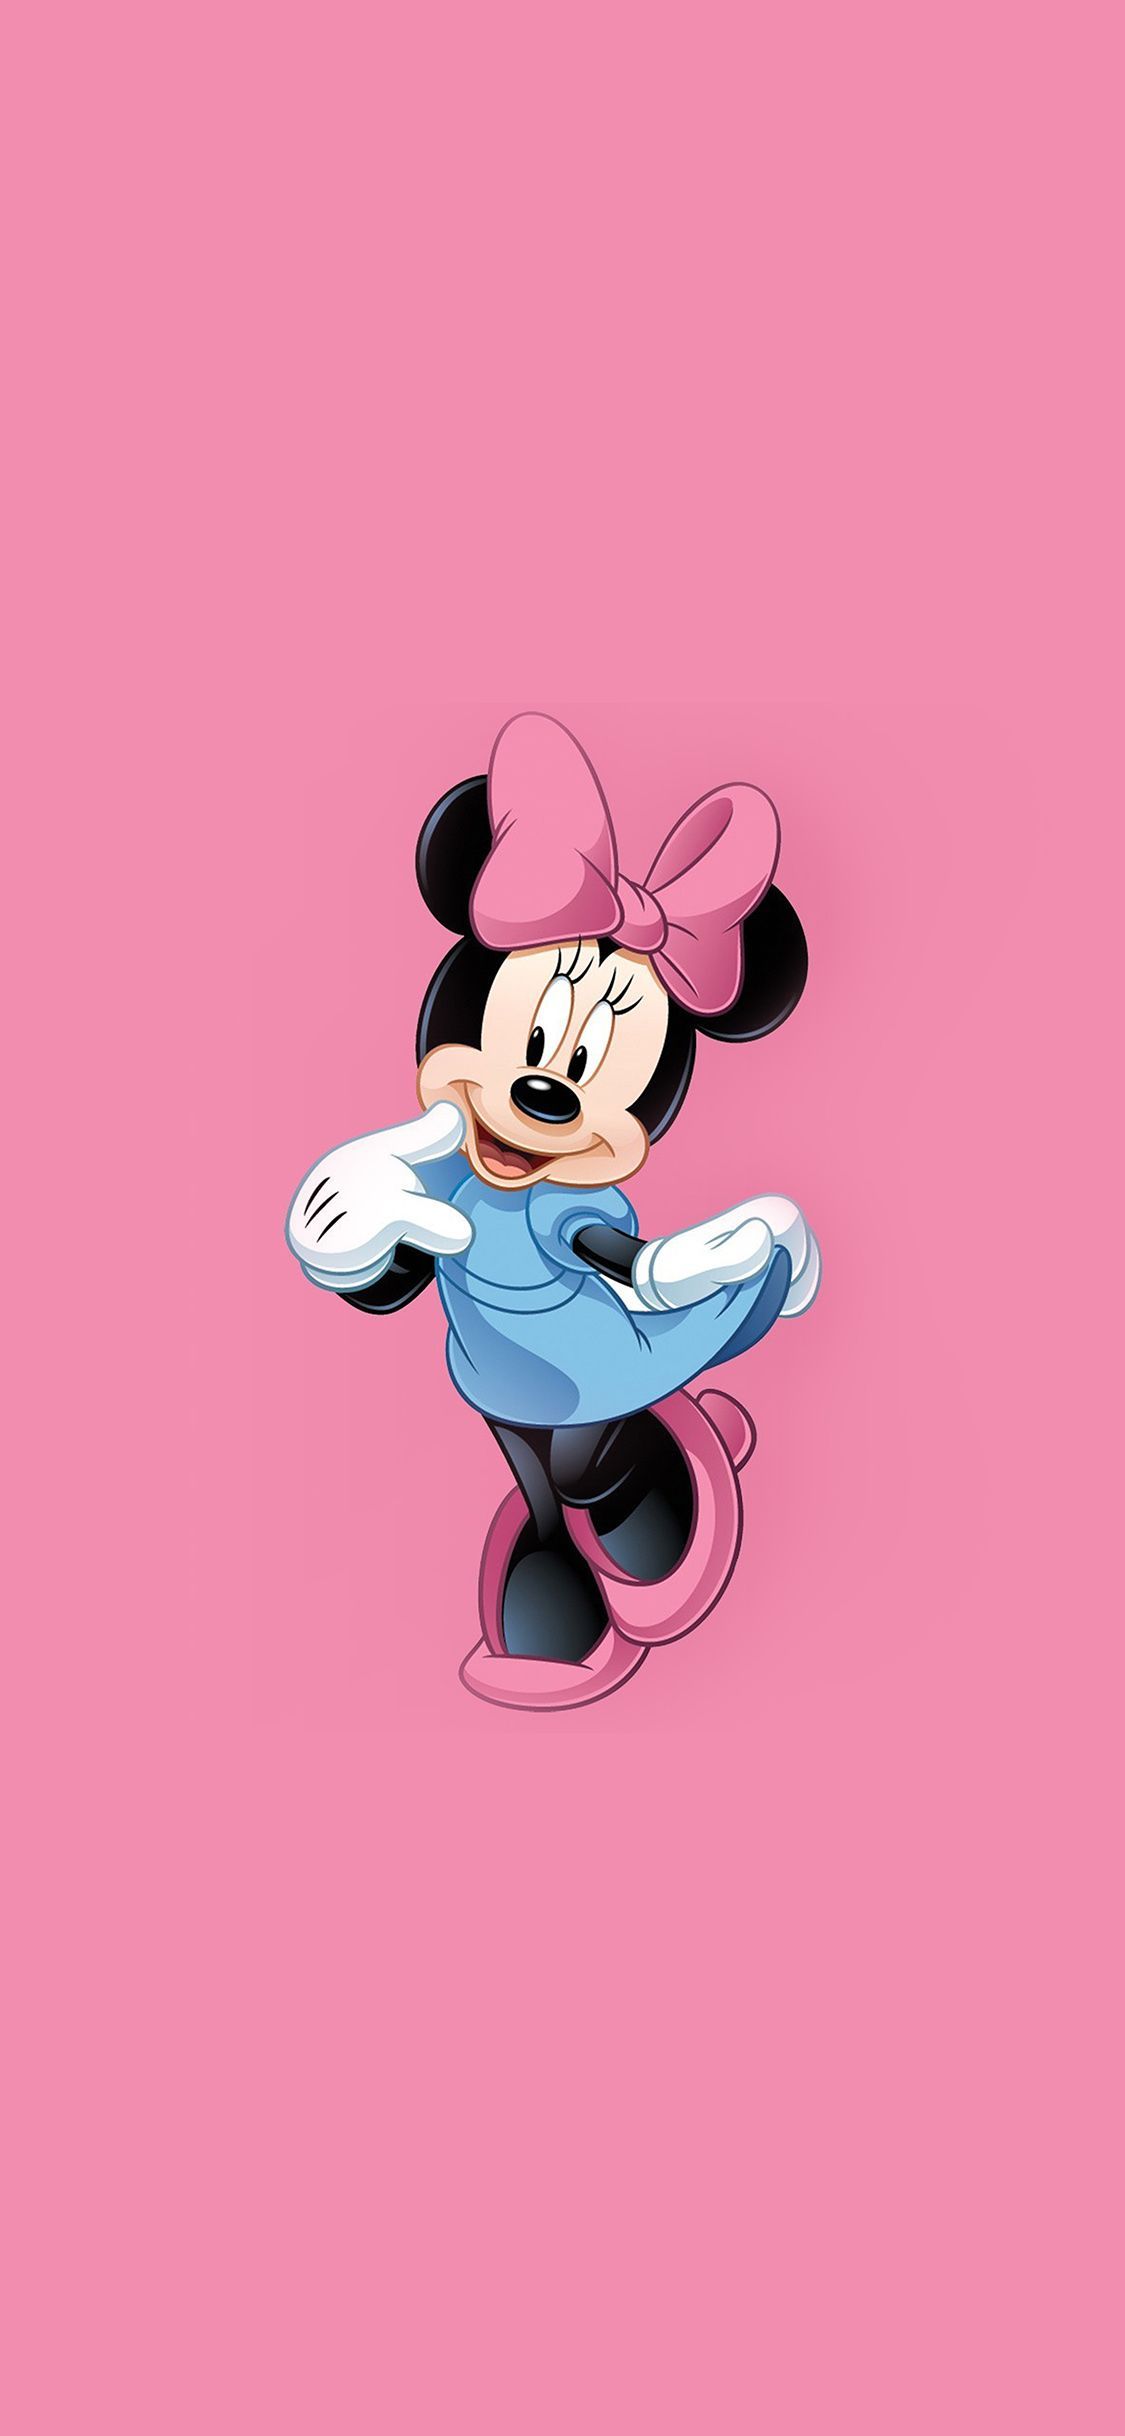 Minnie Mouse iPhone Wallpaper On